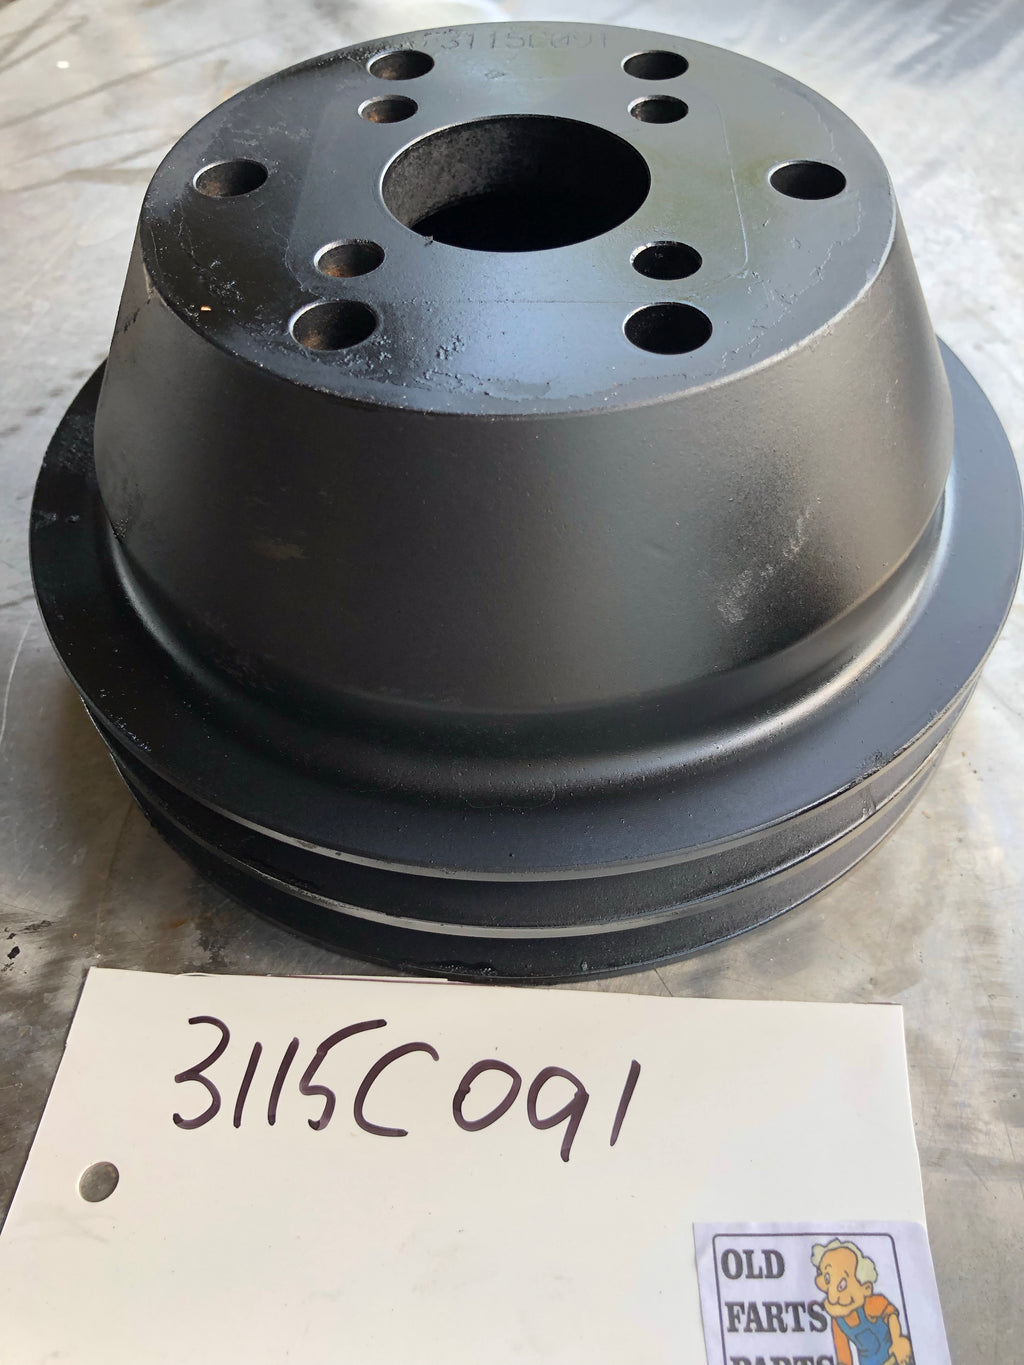 3115C091 - Perkins 1000 series 4 cyl and 6 cyl fan pulley